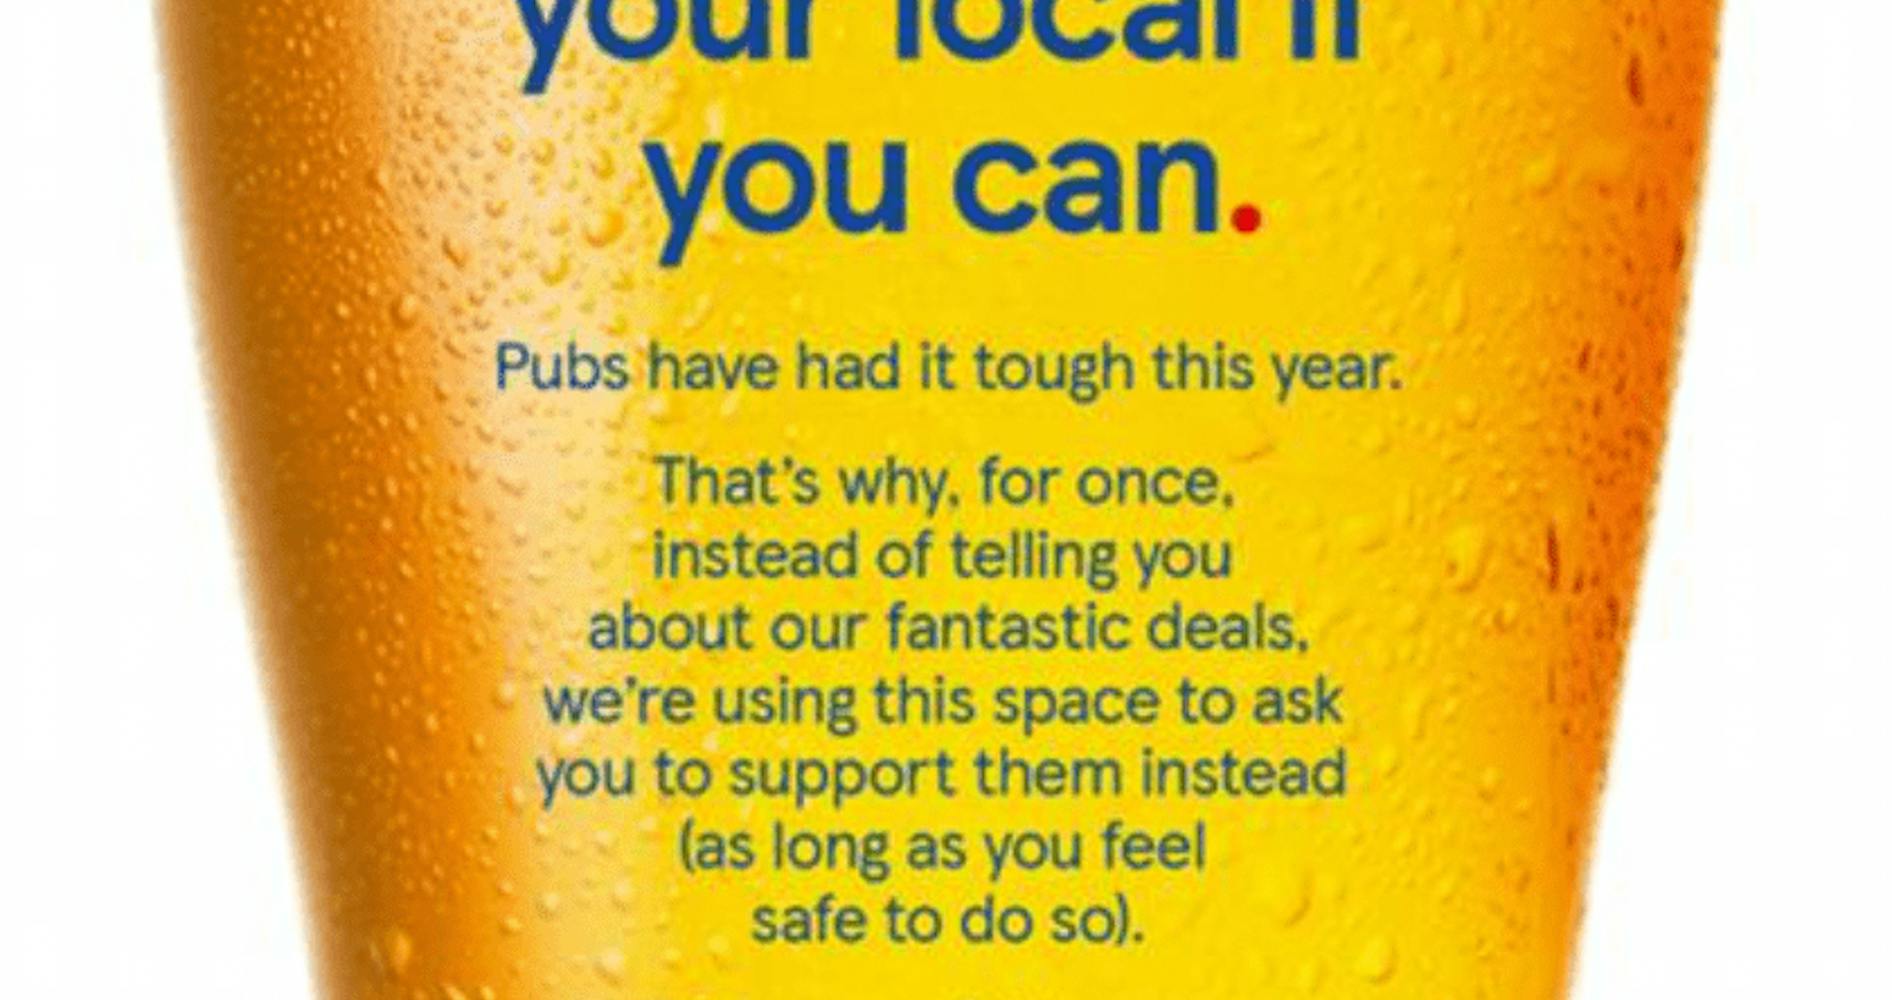 Text ad: Pop to the local if you can. Pubs have had it tough this year. Because right now, every little helps. Tesco.